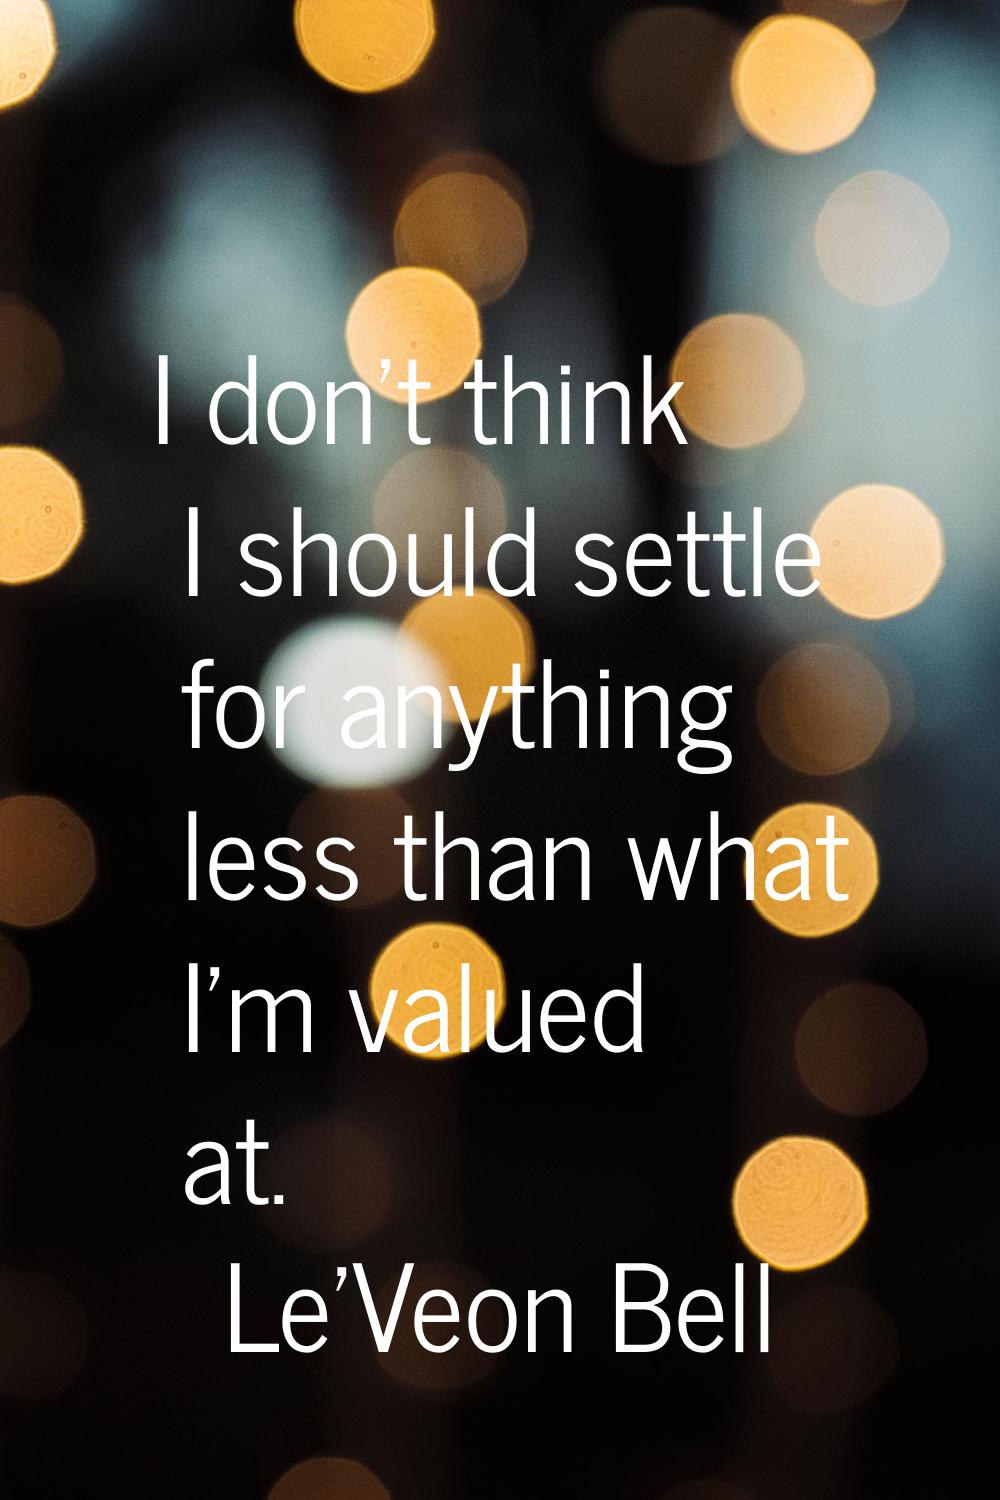 I don't think I should settle for anything less than what I'm valued at.